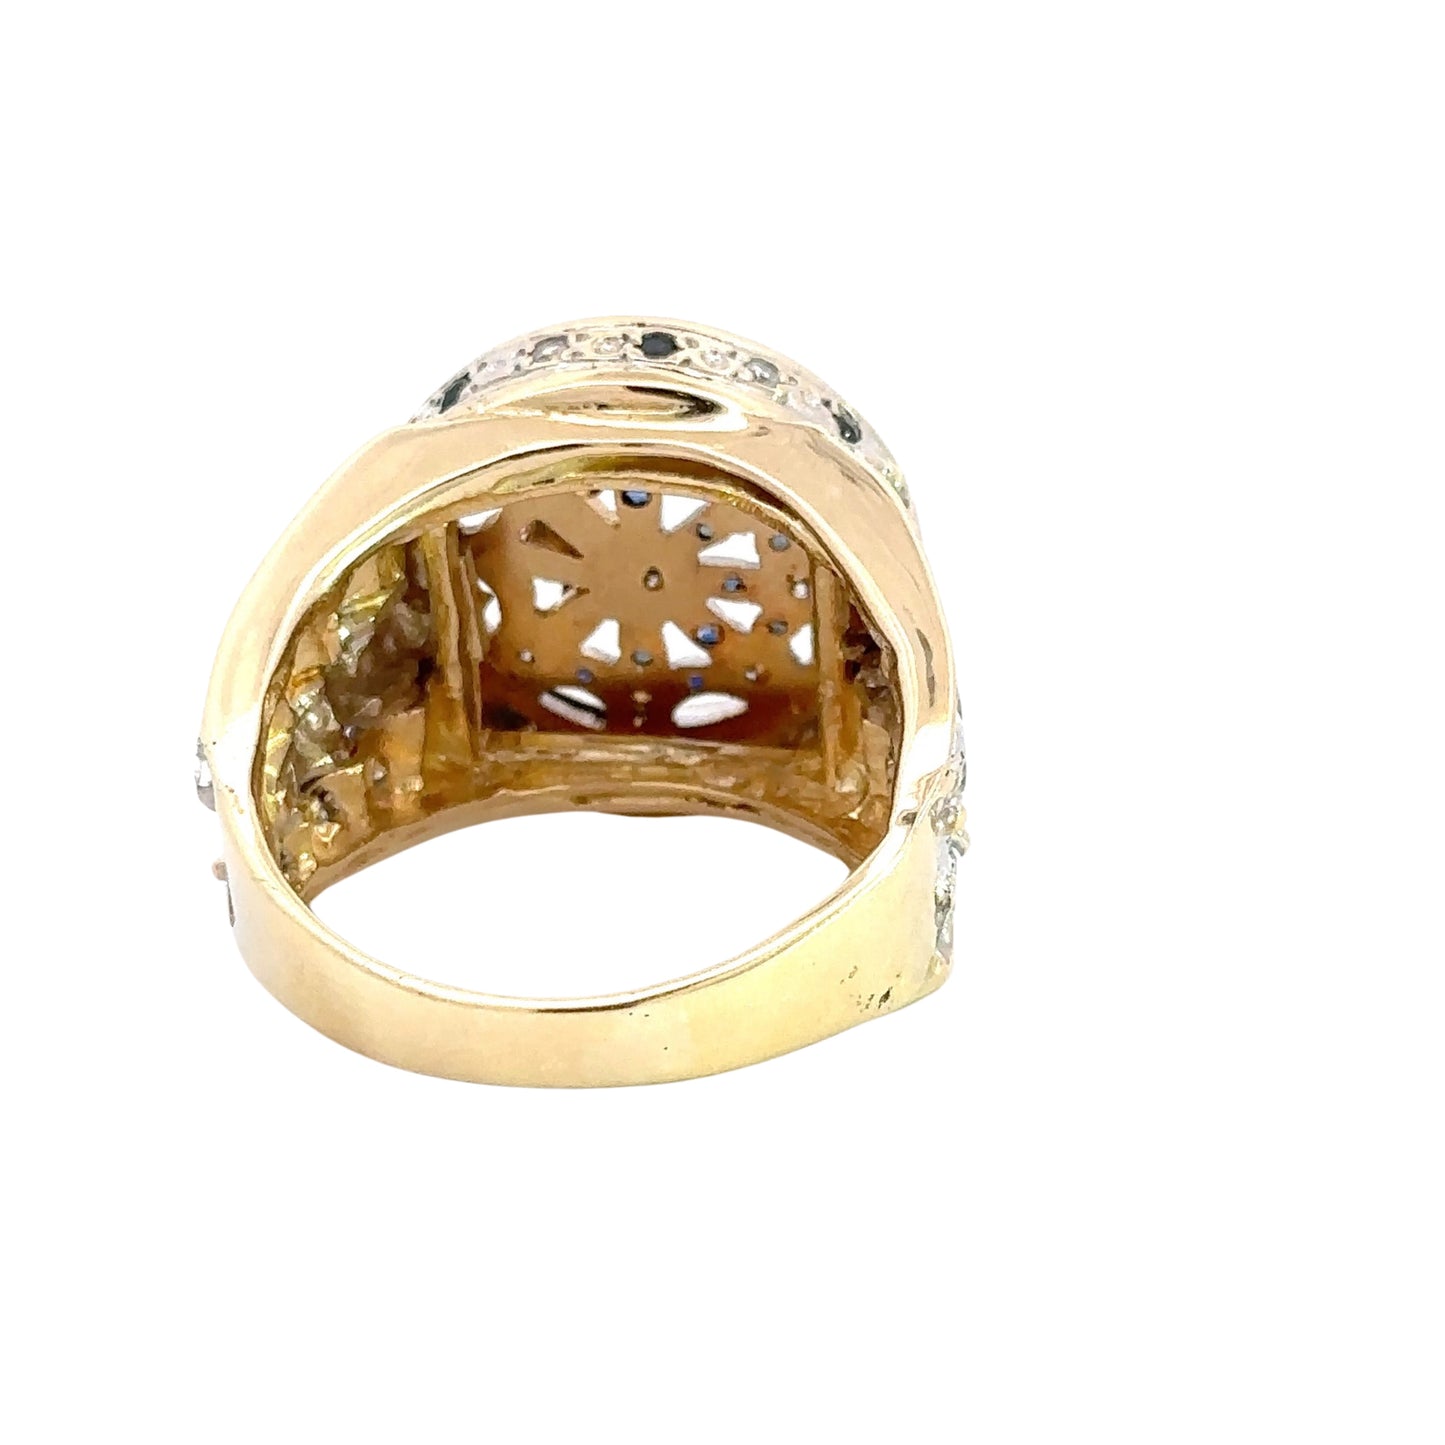 Back of ring with scratch on gold 